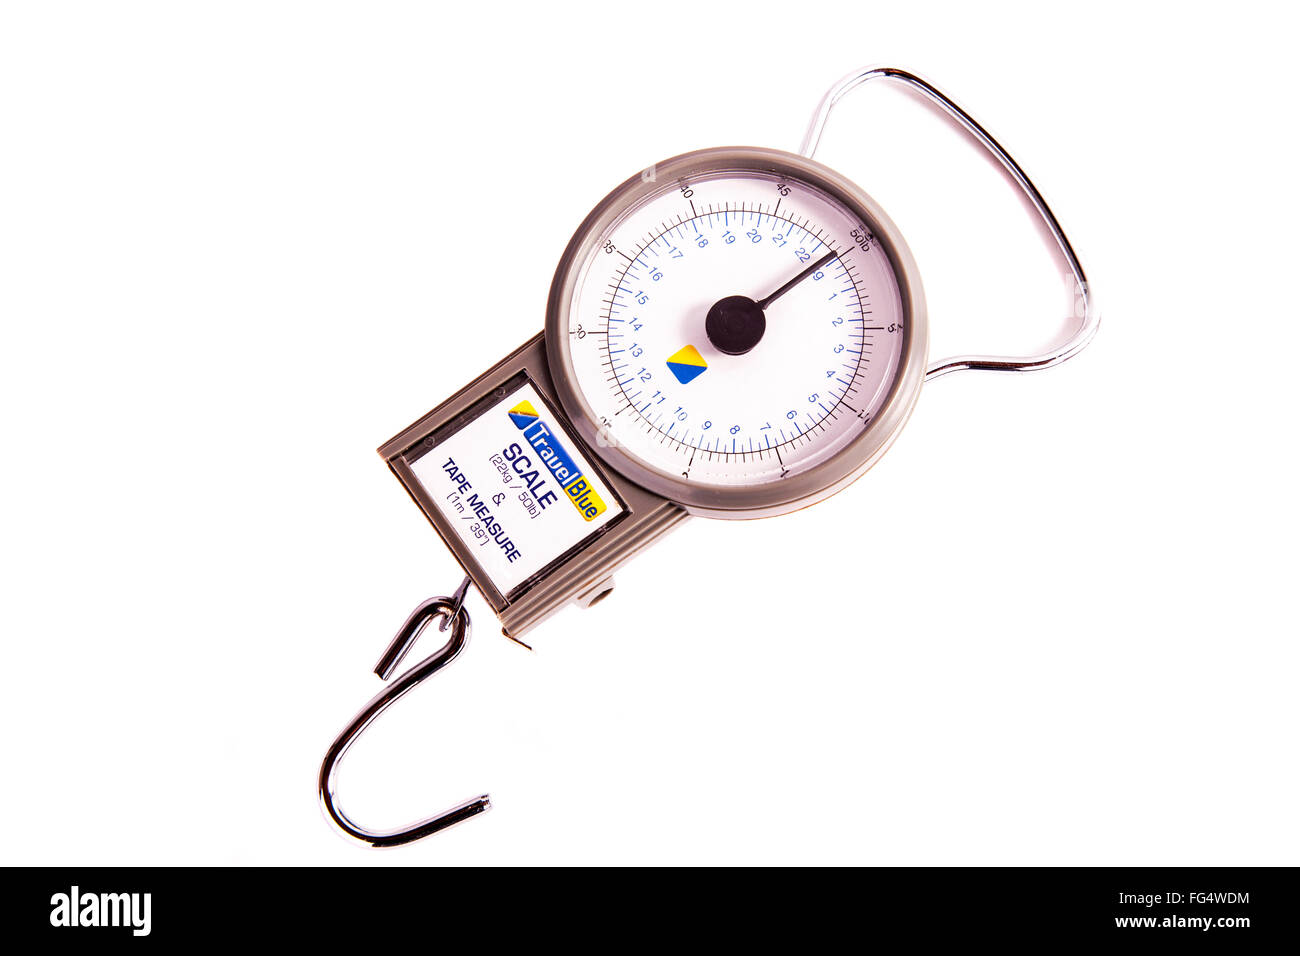 Close Up of Hand Luggage Scale for Control the Weight. Stock Photo - Image  of control, board: 174570710